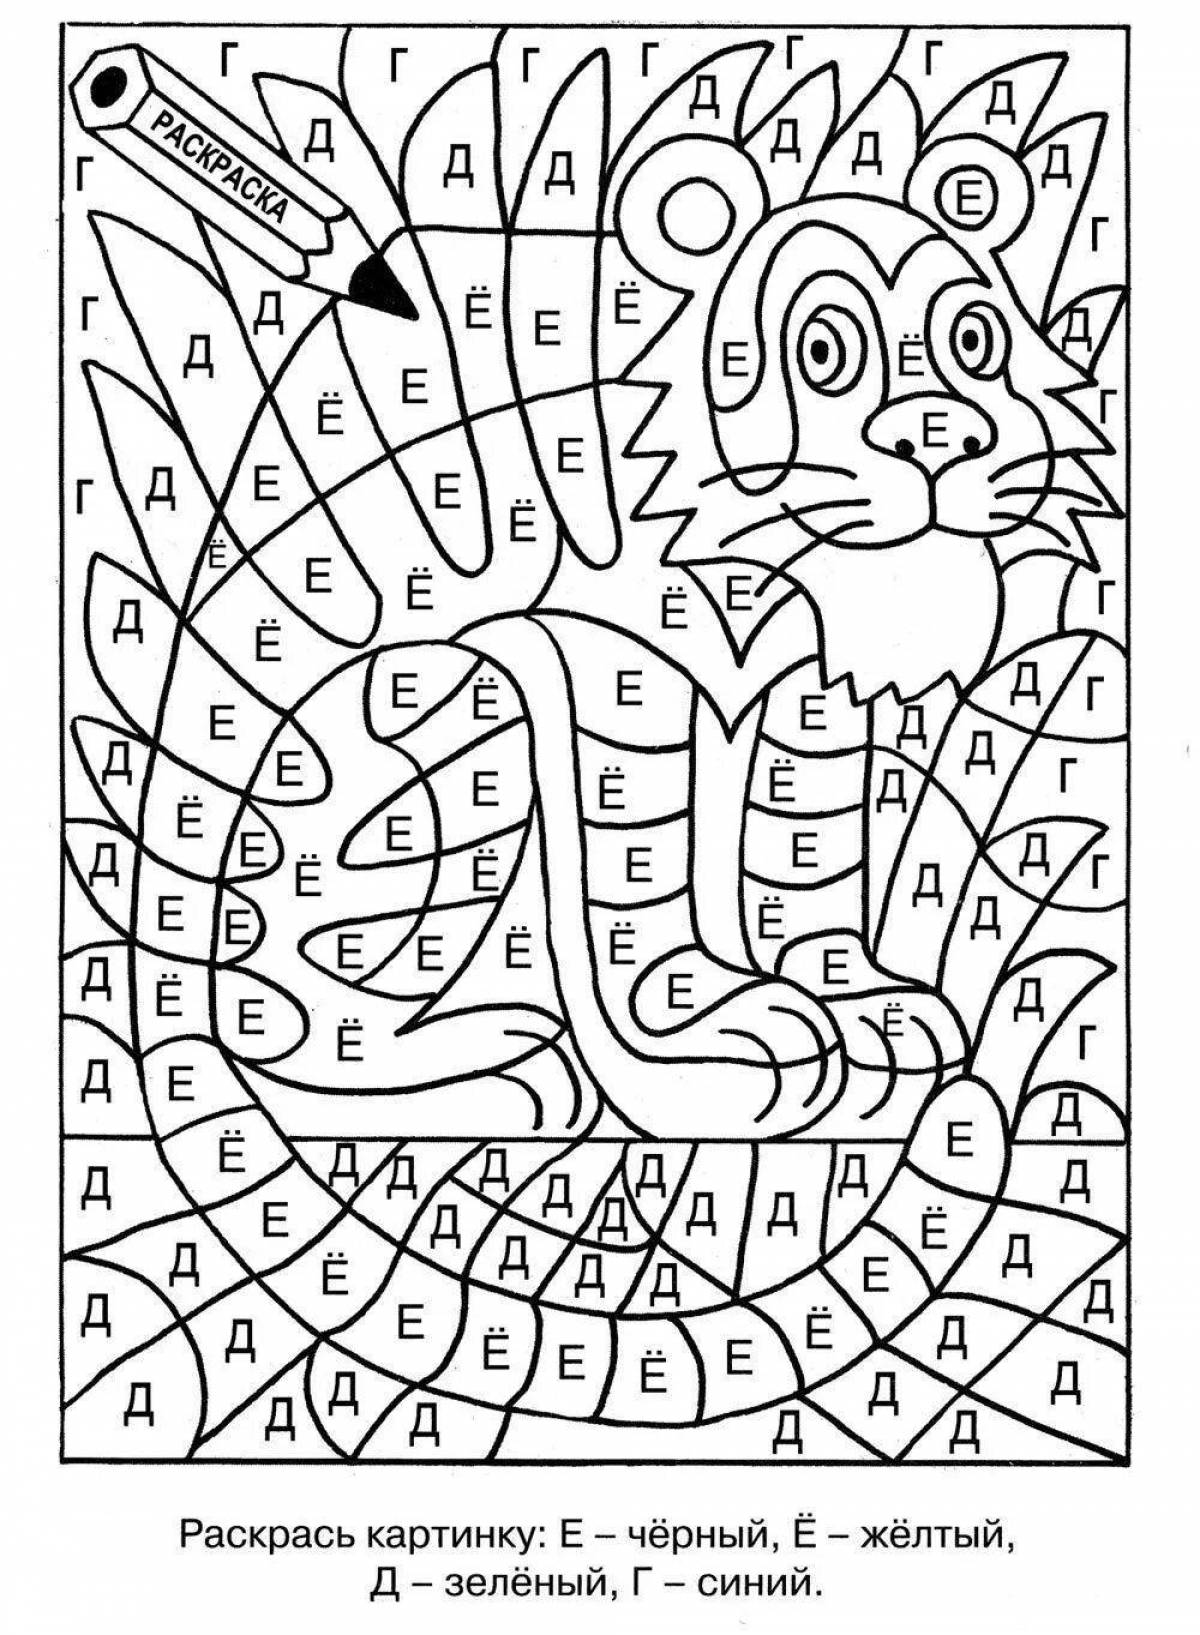 Multi-colored mysterious coloring book intelligent